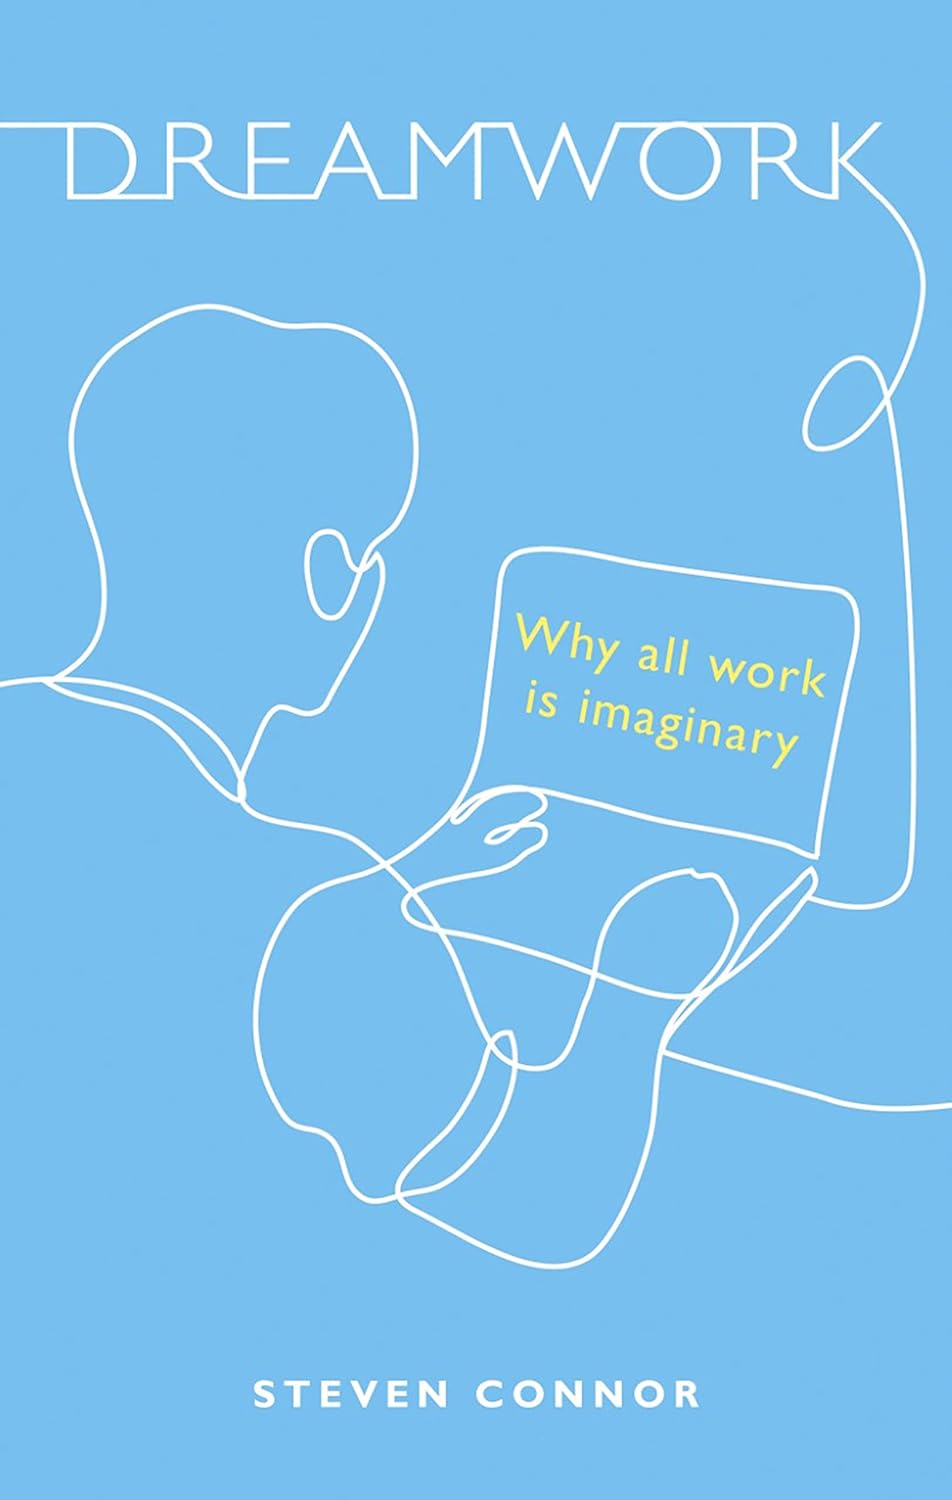 Dreamwork: Why All Work Is Imaginary